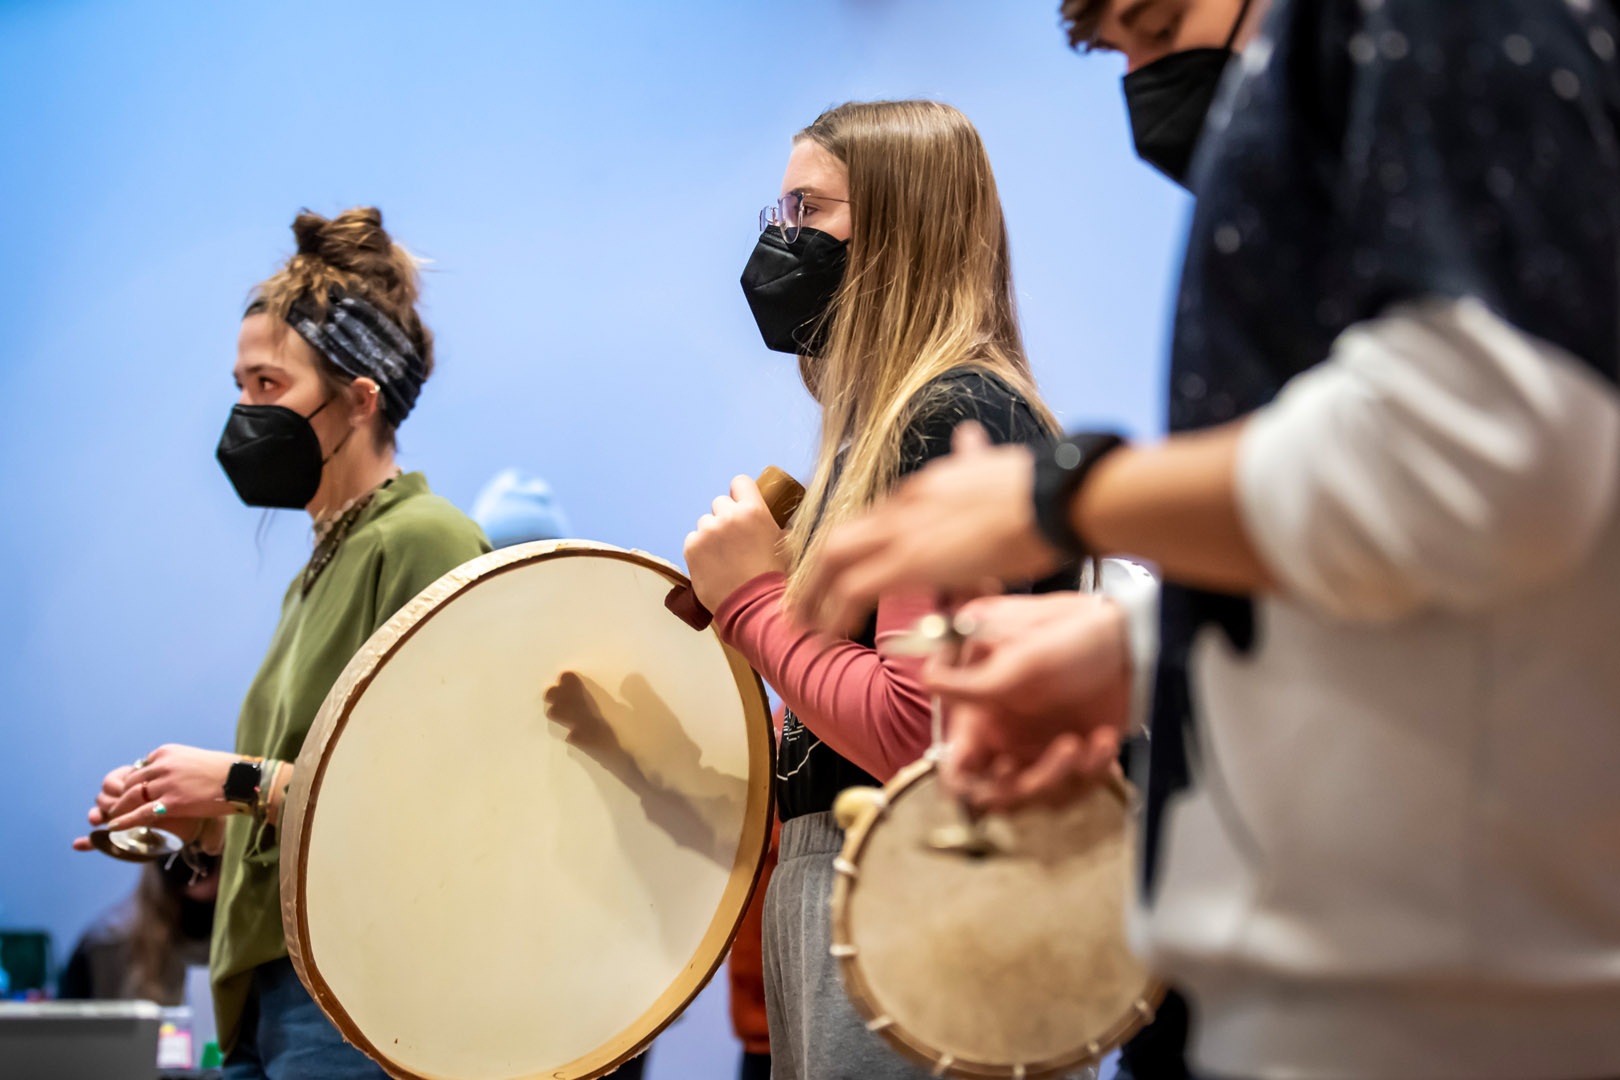 From left, Auna McConnaughey ’24 plays finger cymbals (behind larger drum) and Mira Giles-Puhahl ’25 plays large hand drum (with shadow of hand). Photo by Lonnie Timmons III